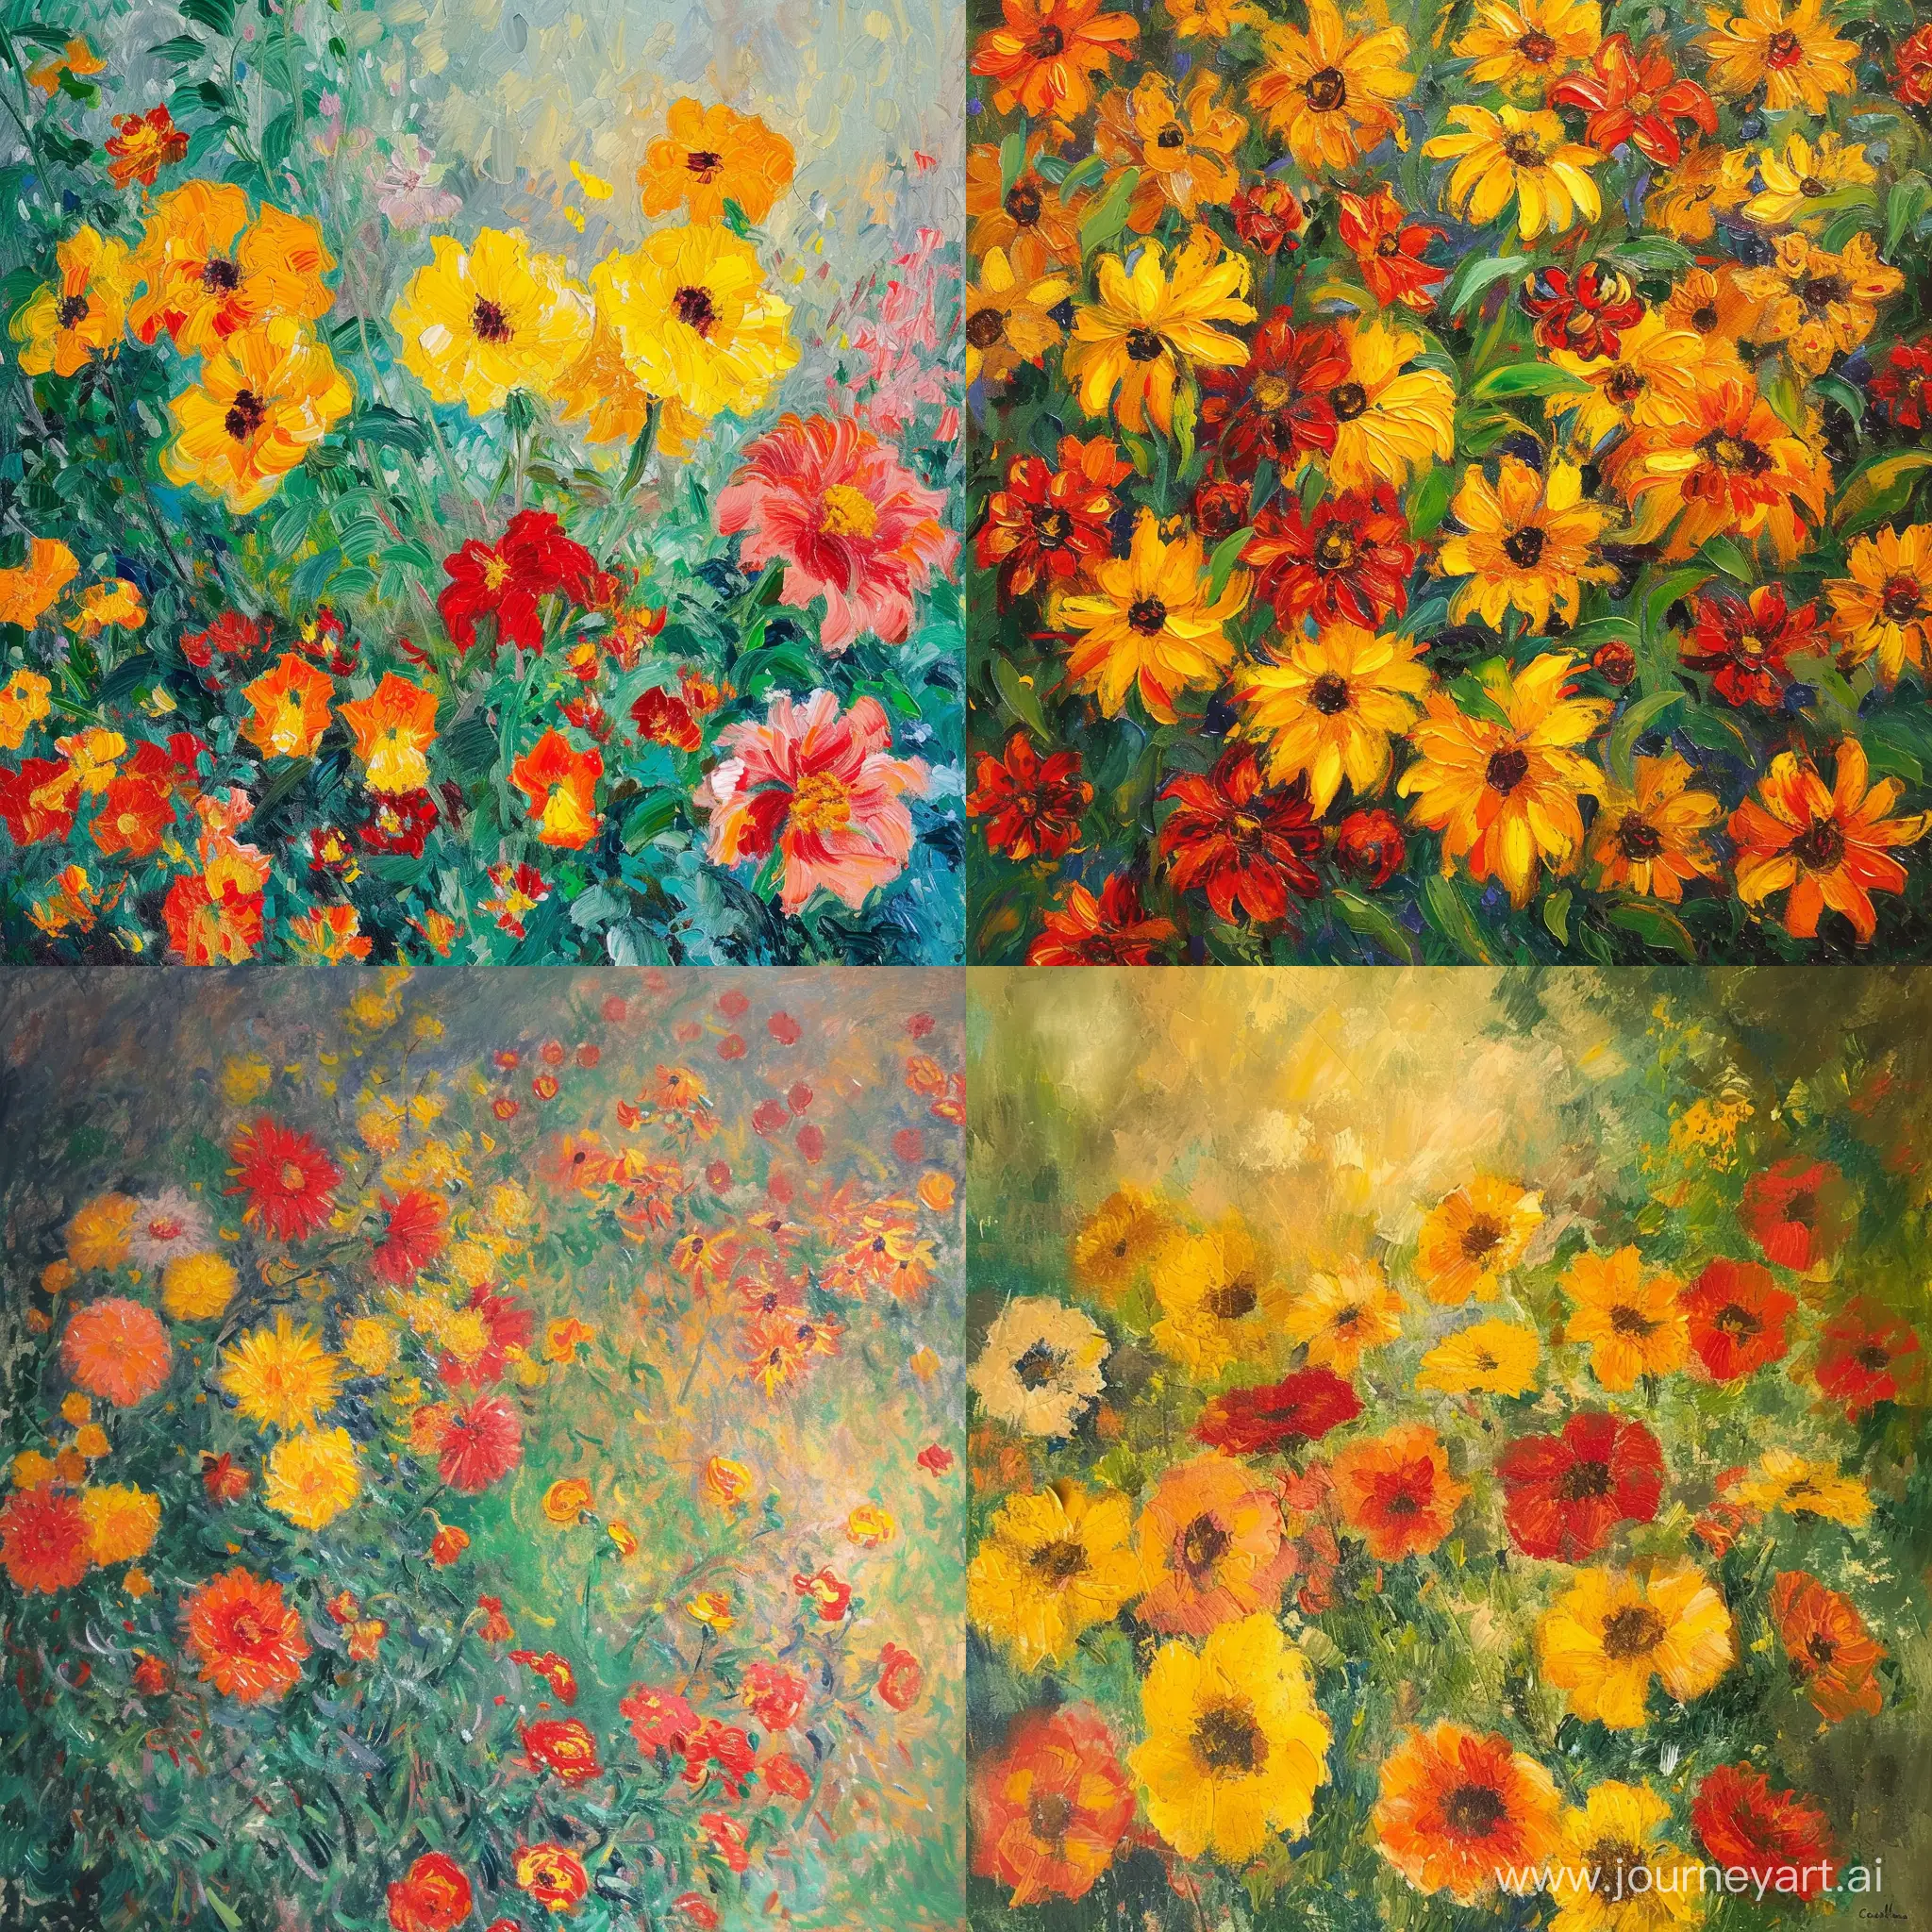 Vibrant-Monet-Flowers-Acrylic-Painting-with-Yellow-Red-and-Orange-Blossoms